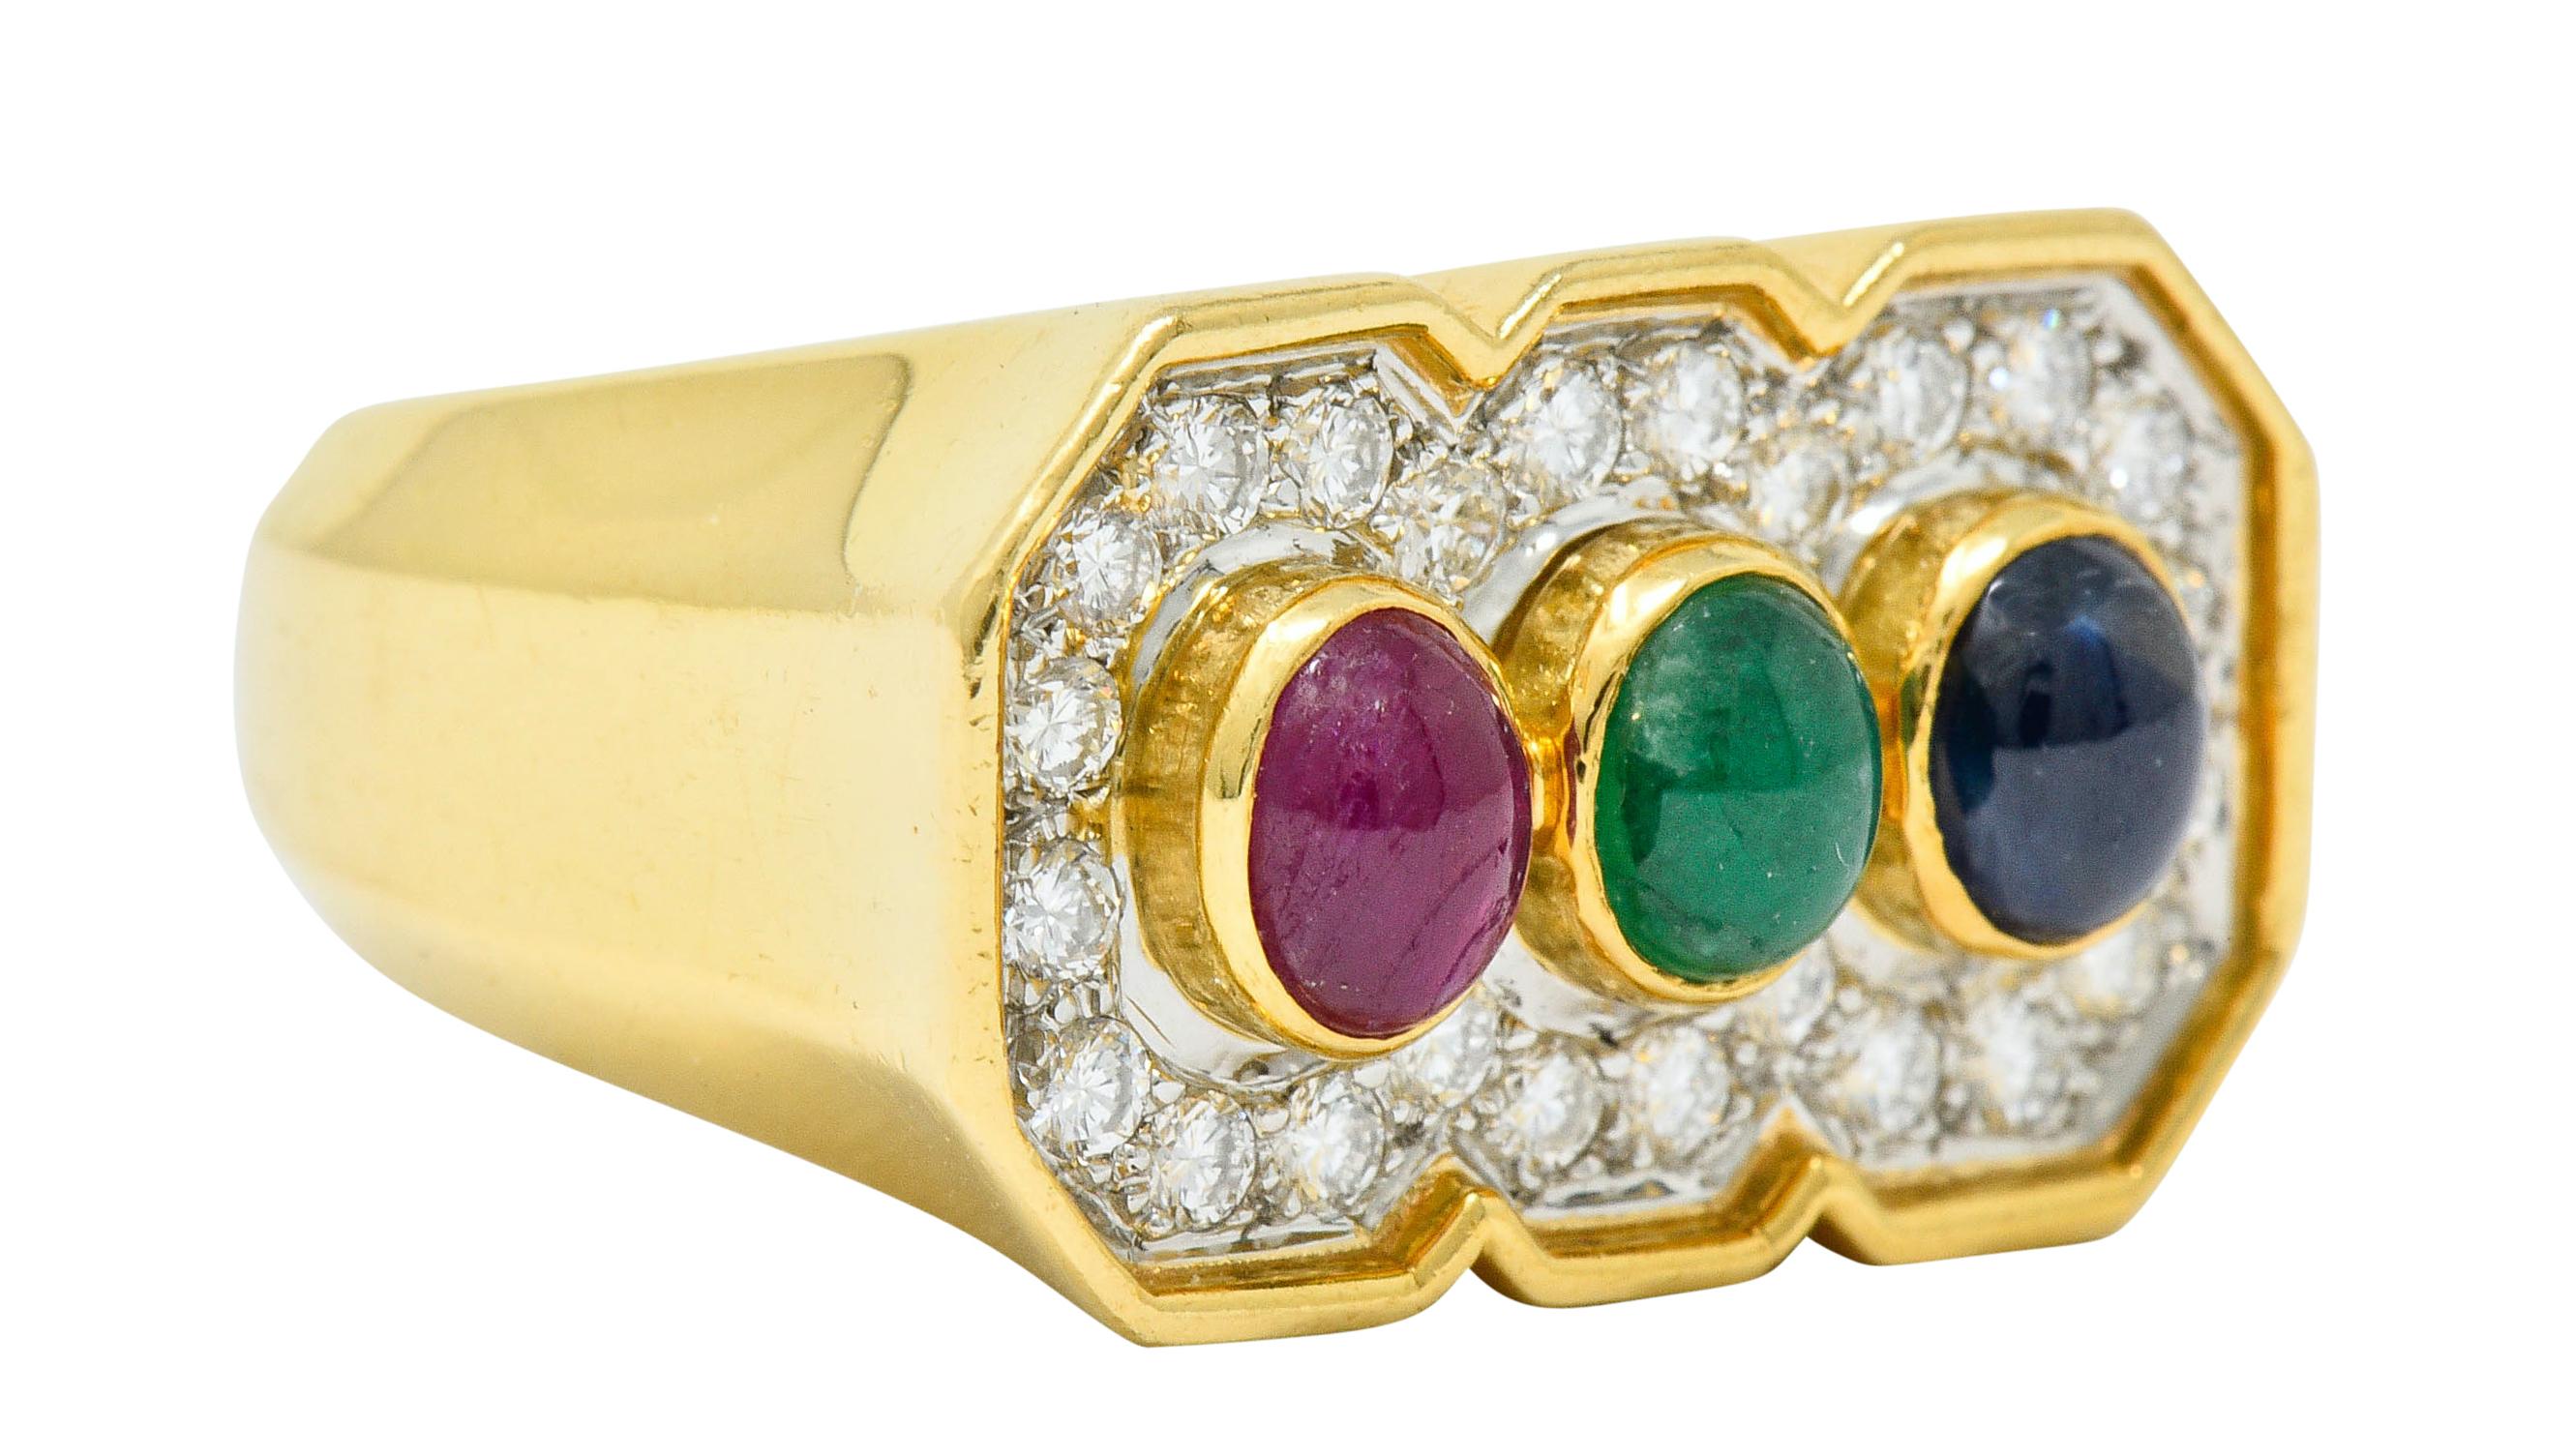 Rectangular mounting centers three bezel set cabochons of ruby, sapphire, and emerald

Translucent and brightly colored while weighing in total approximately 1.50 carats

Surrounded by a recessed geometric halo of round brilliant cut diamonds, bead